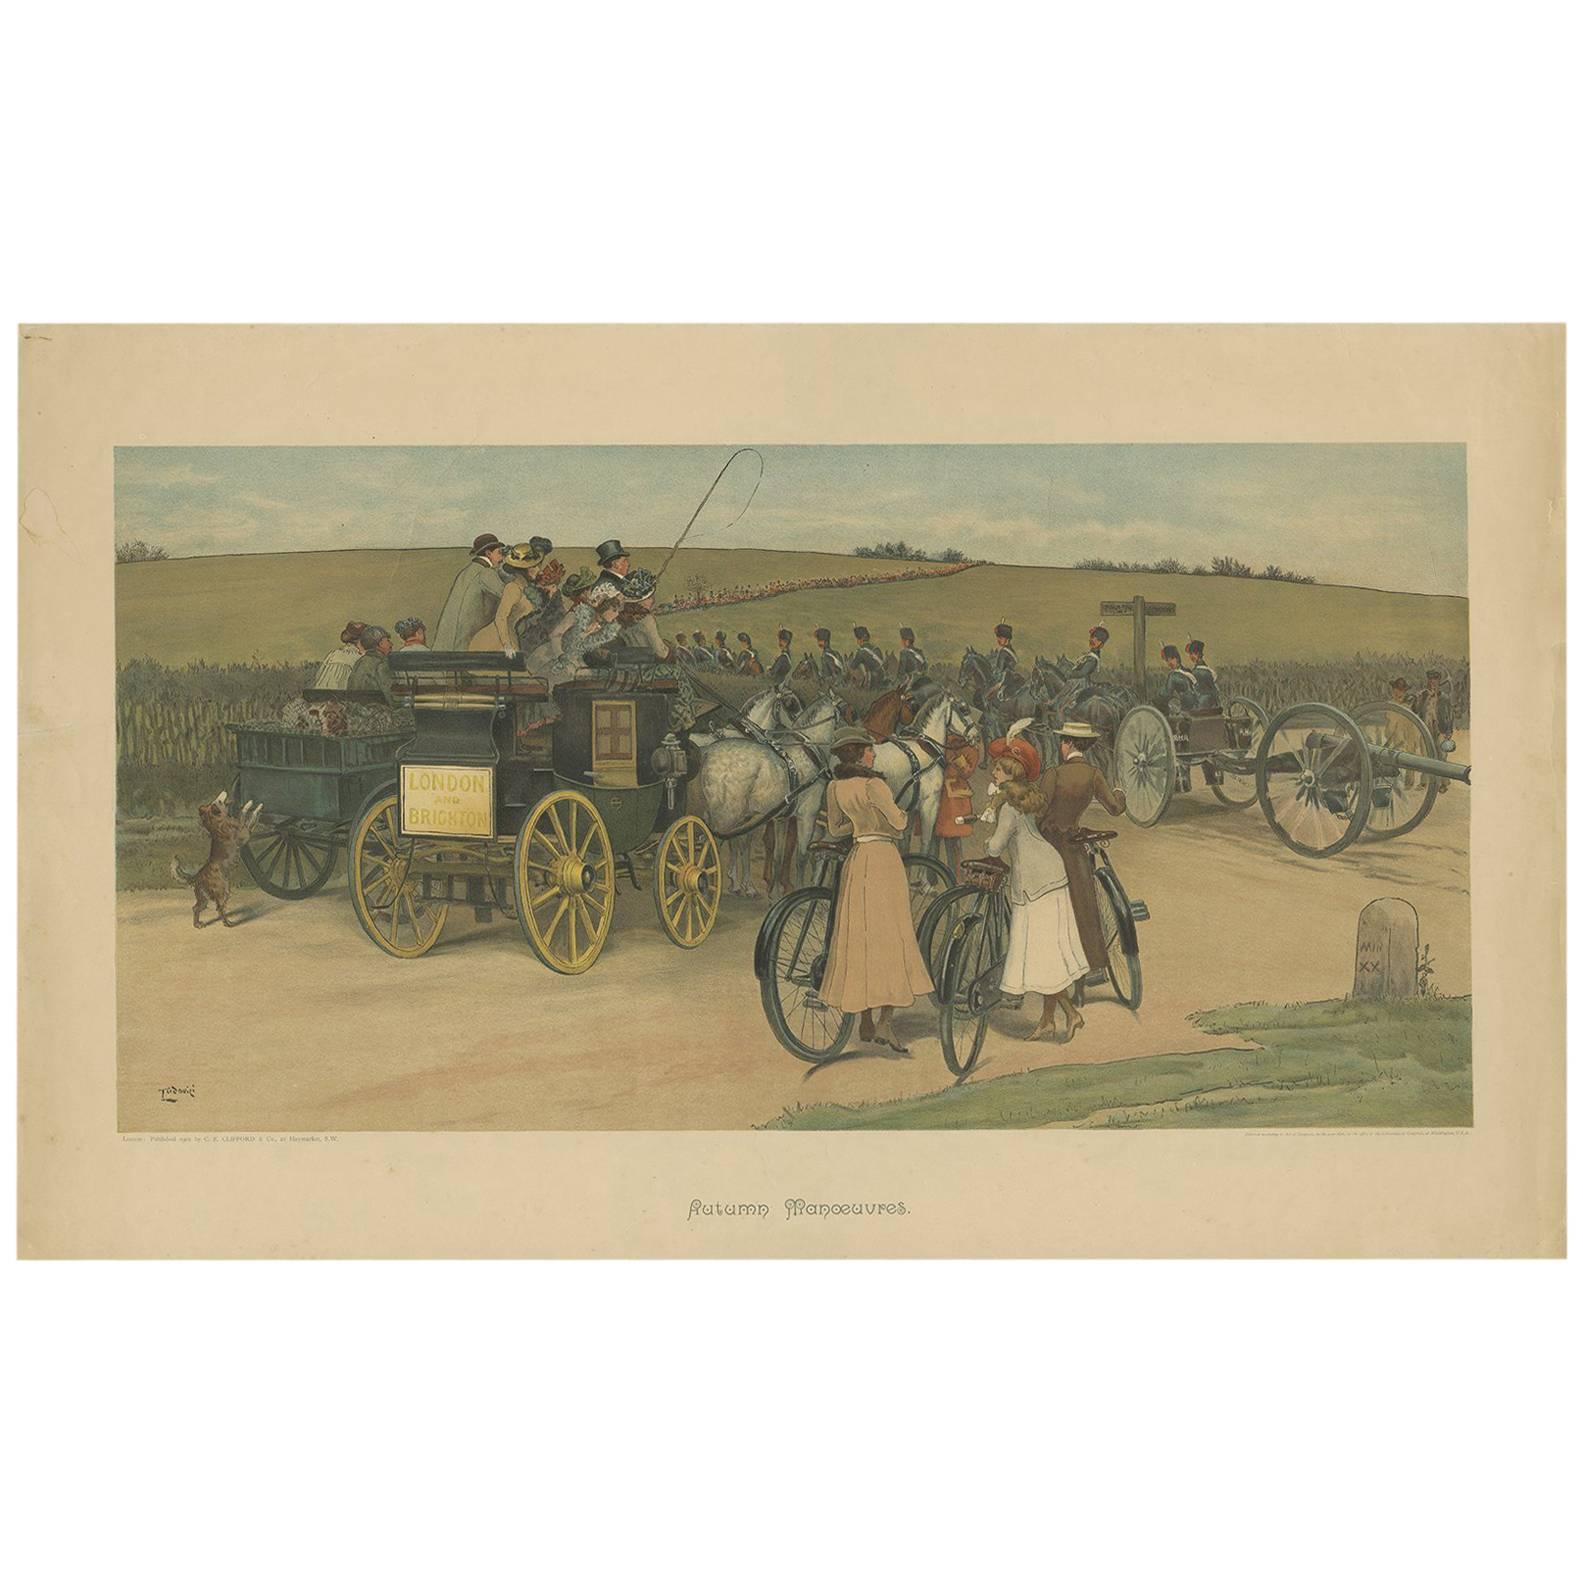 Antique Military Print of a Troop Manoeuvre by C.E. Clifford, 1901